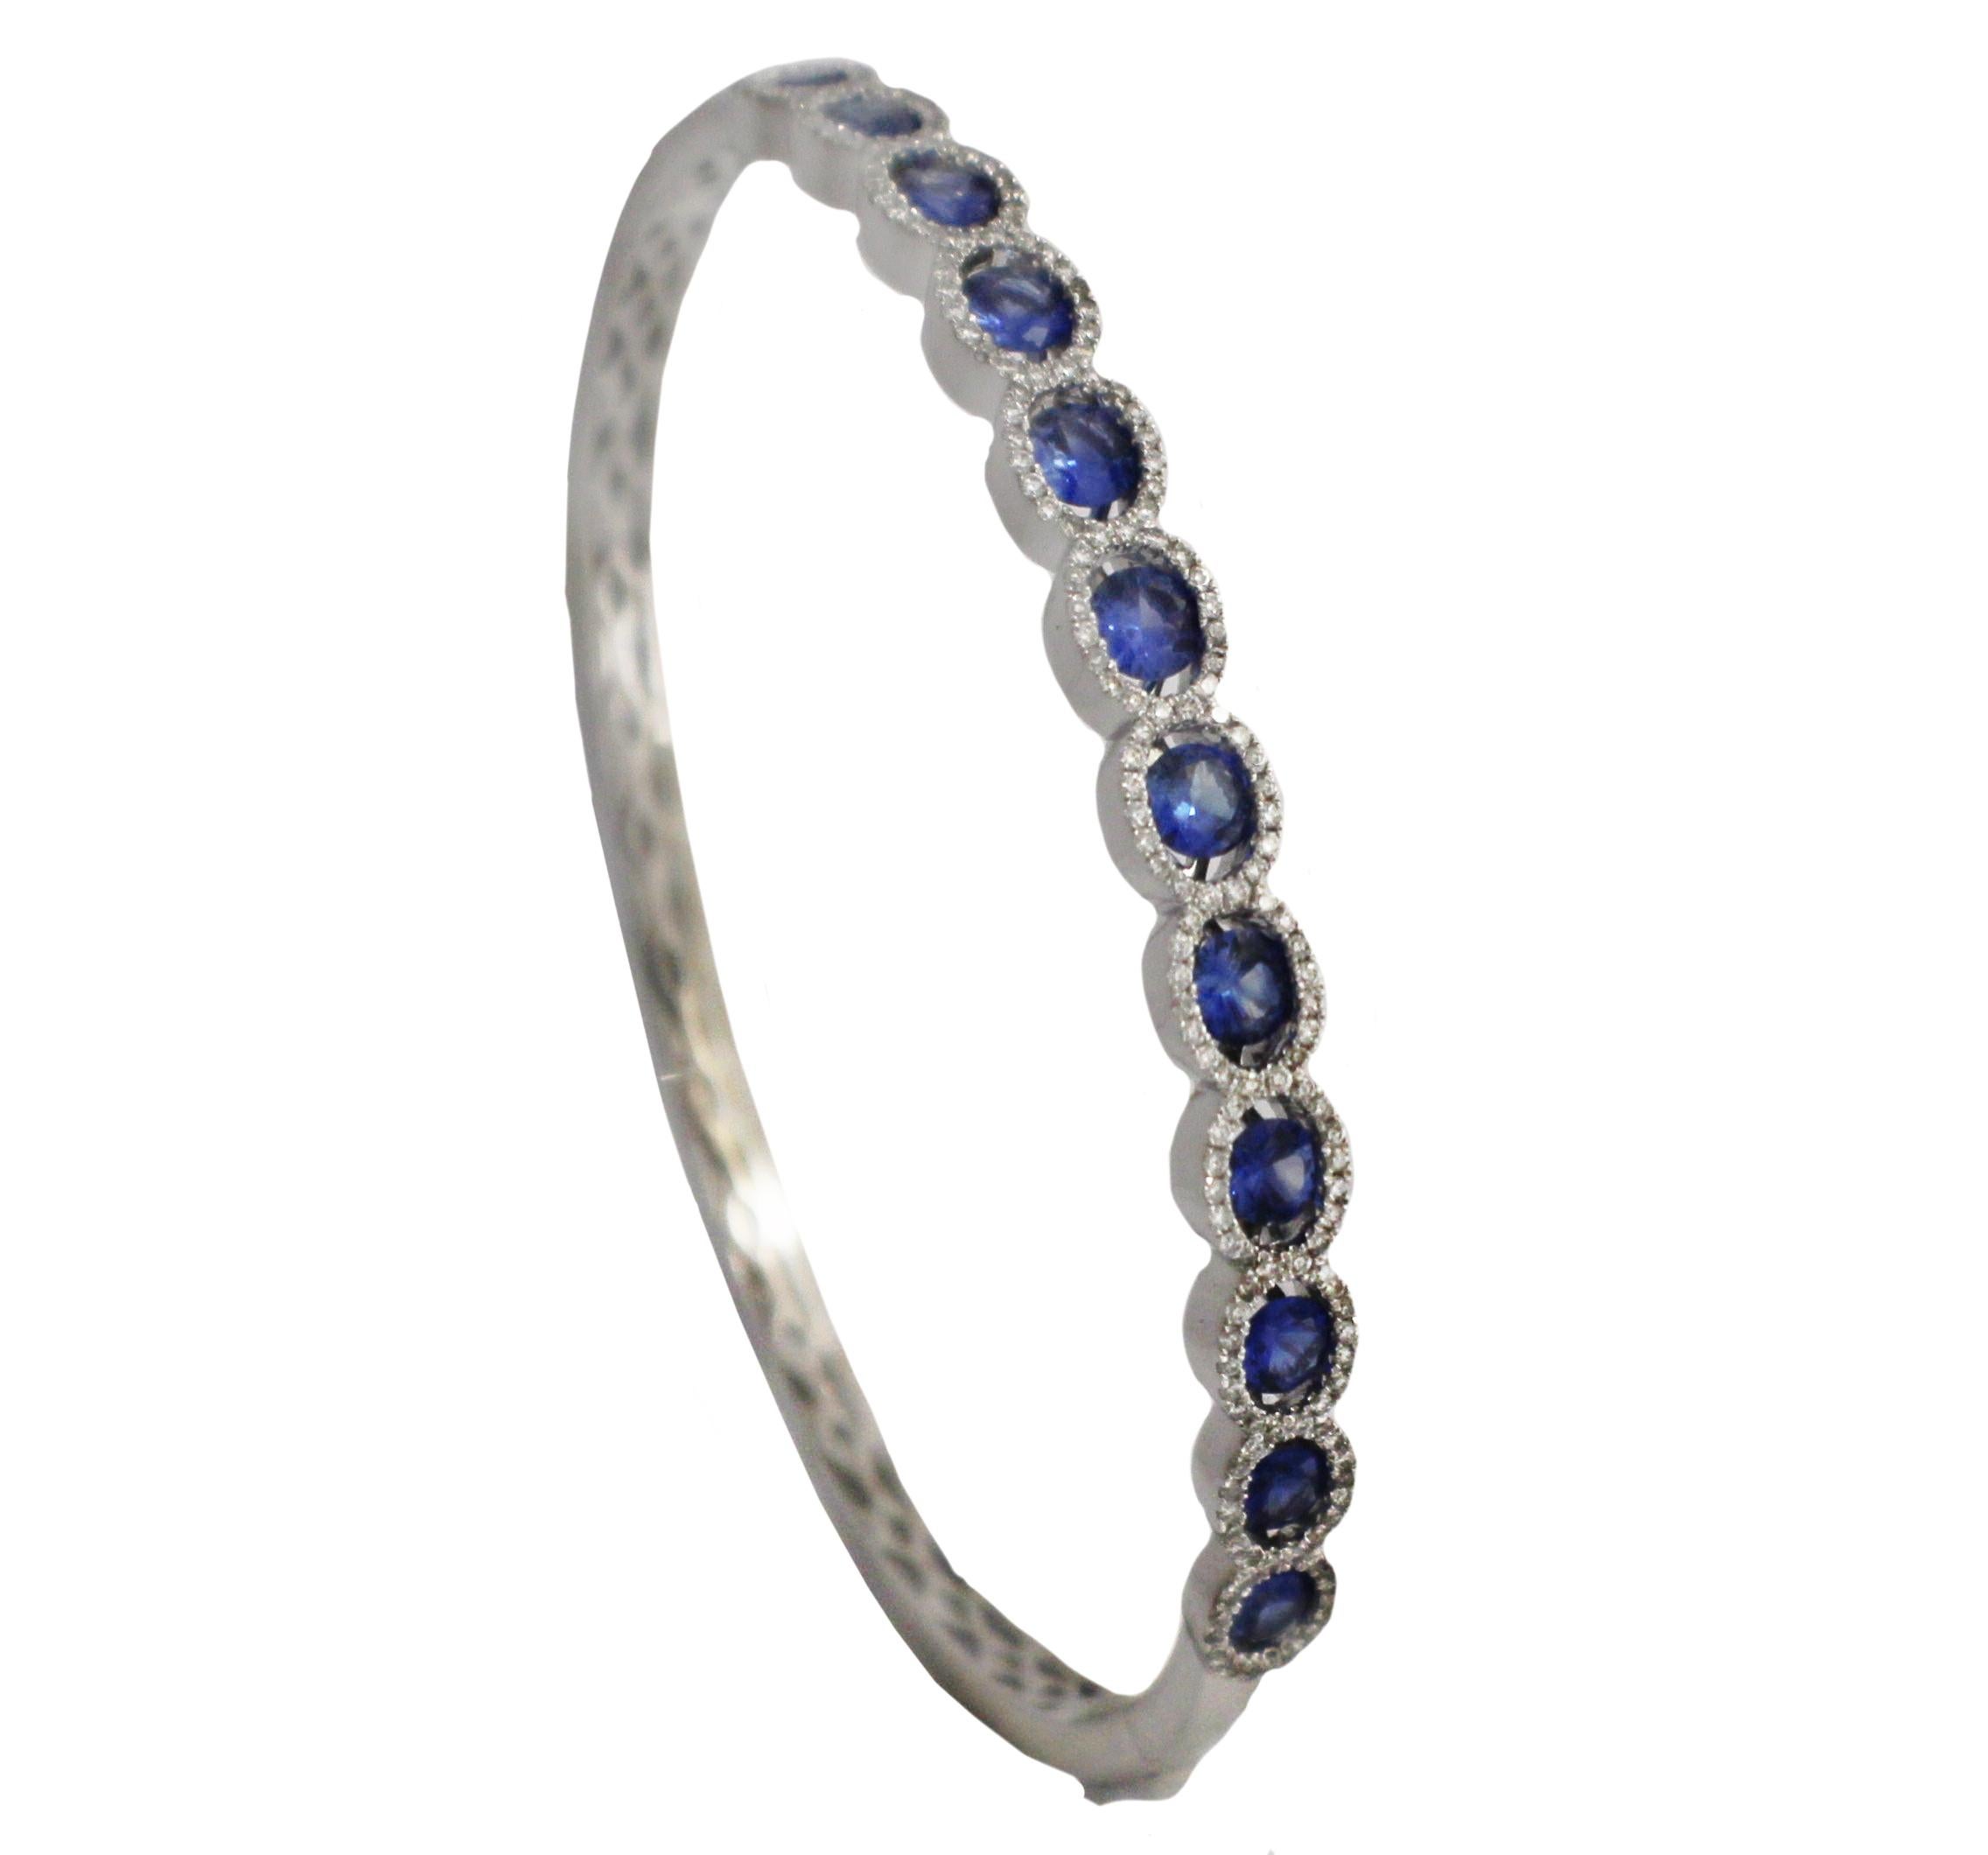 Never worn, brand new!  Crafted in 18 karat white gold this stunning bangle bracelet features twelve perfectly matched faceted oval Ceylon sapphires with a combined total weight of 2.09 carats.  Each sapphire is framed in micro pave white diamonds. 